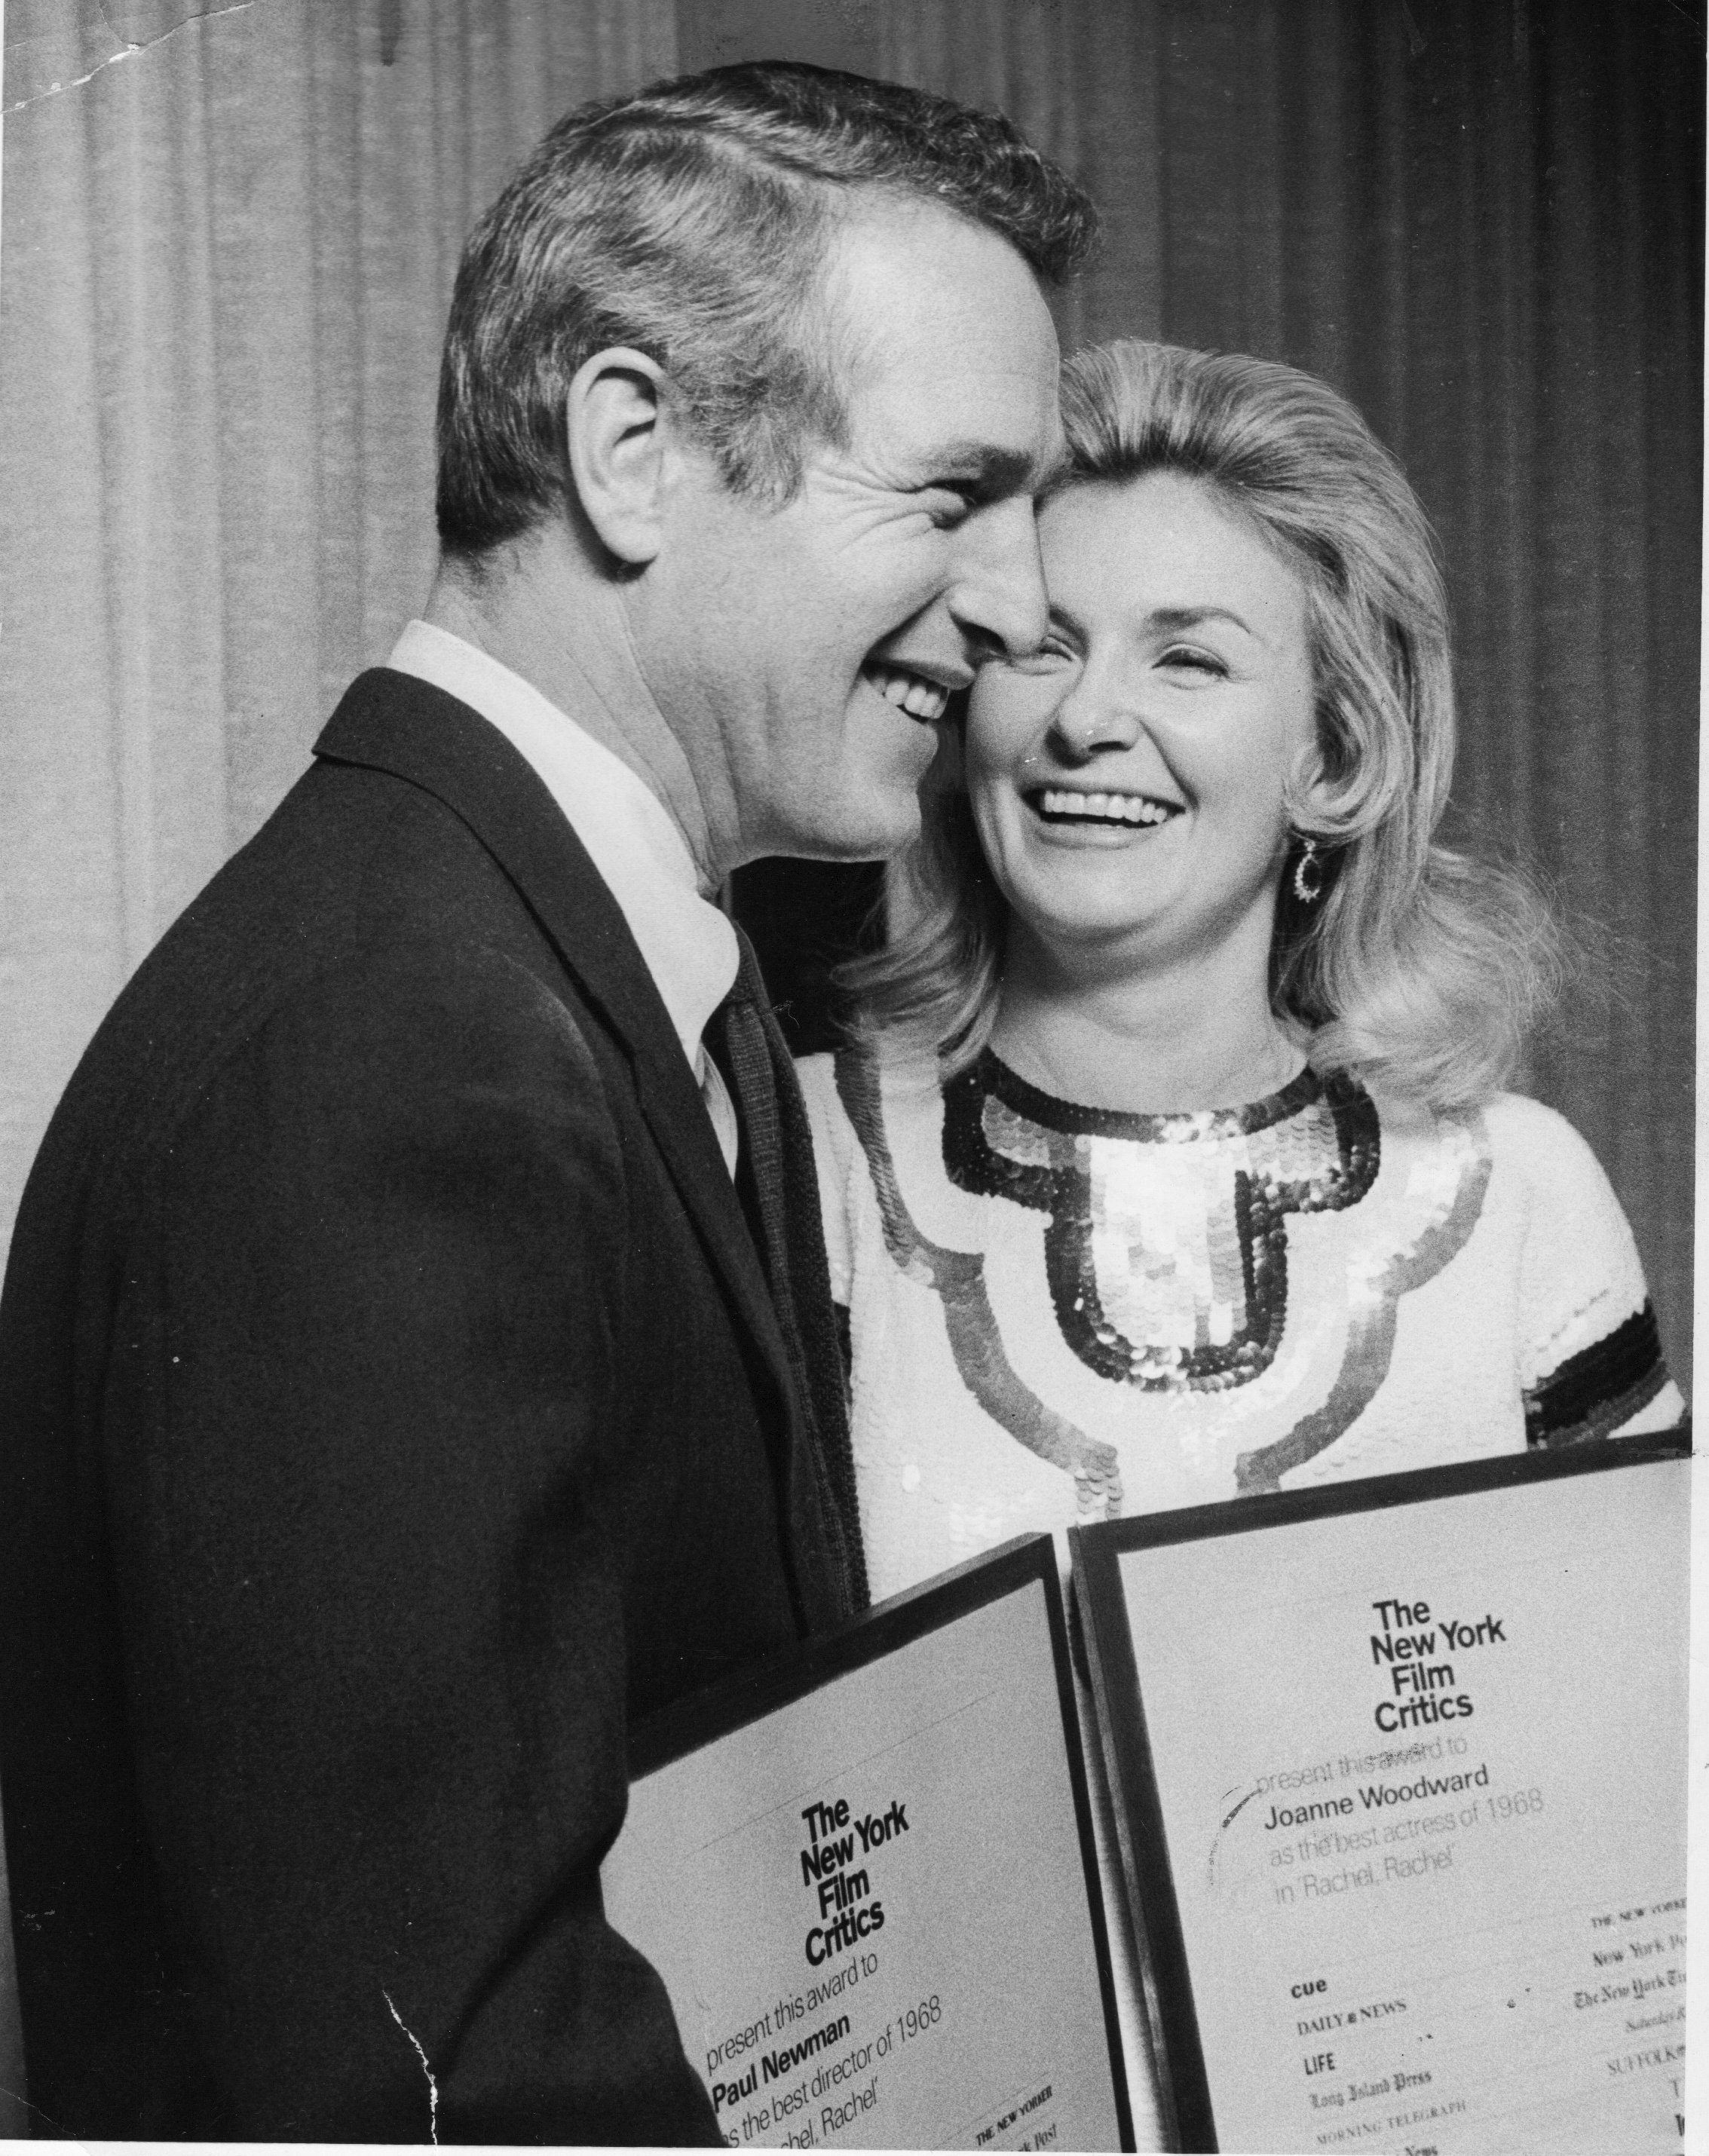 Paul Newman and Joanne Woodward pictured together after they both received awards from the New York Film Critics at the Rainbow Room on January 26, 1969 in Manhattan. / Source: Getty Images